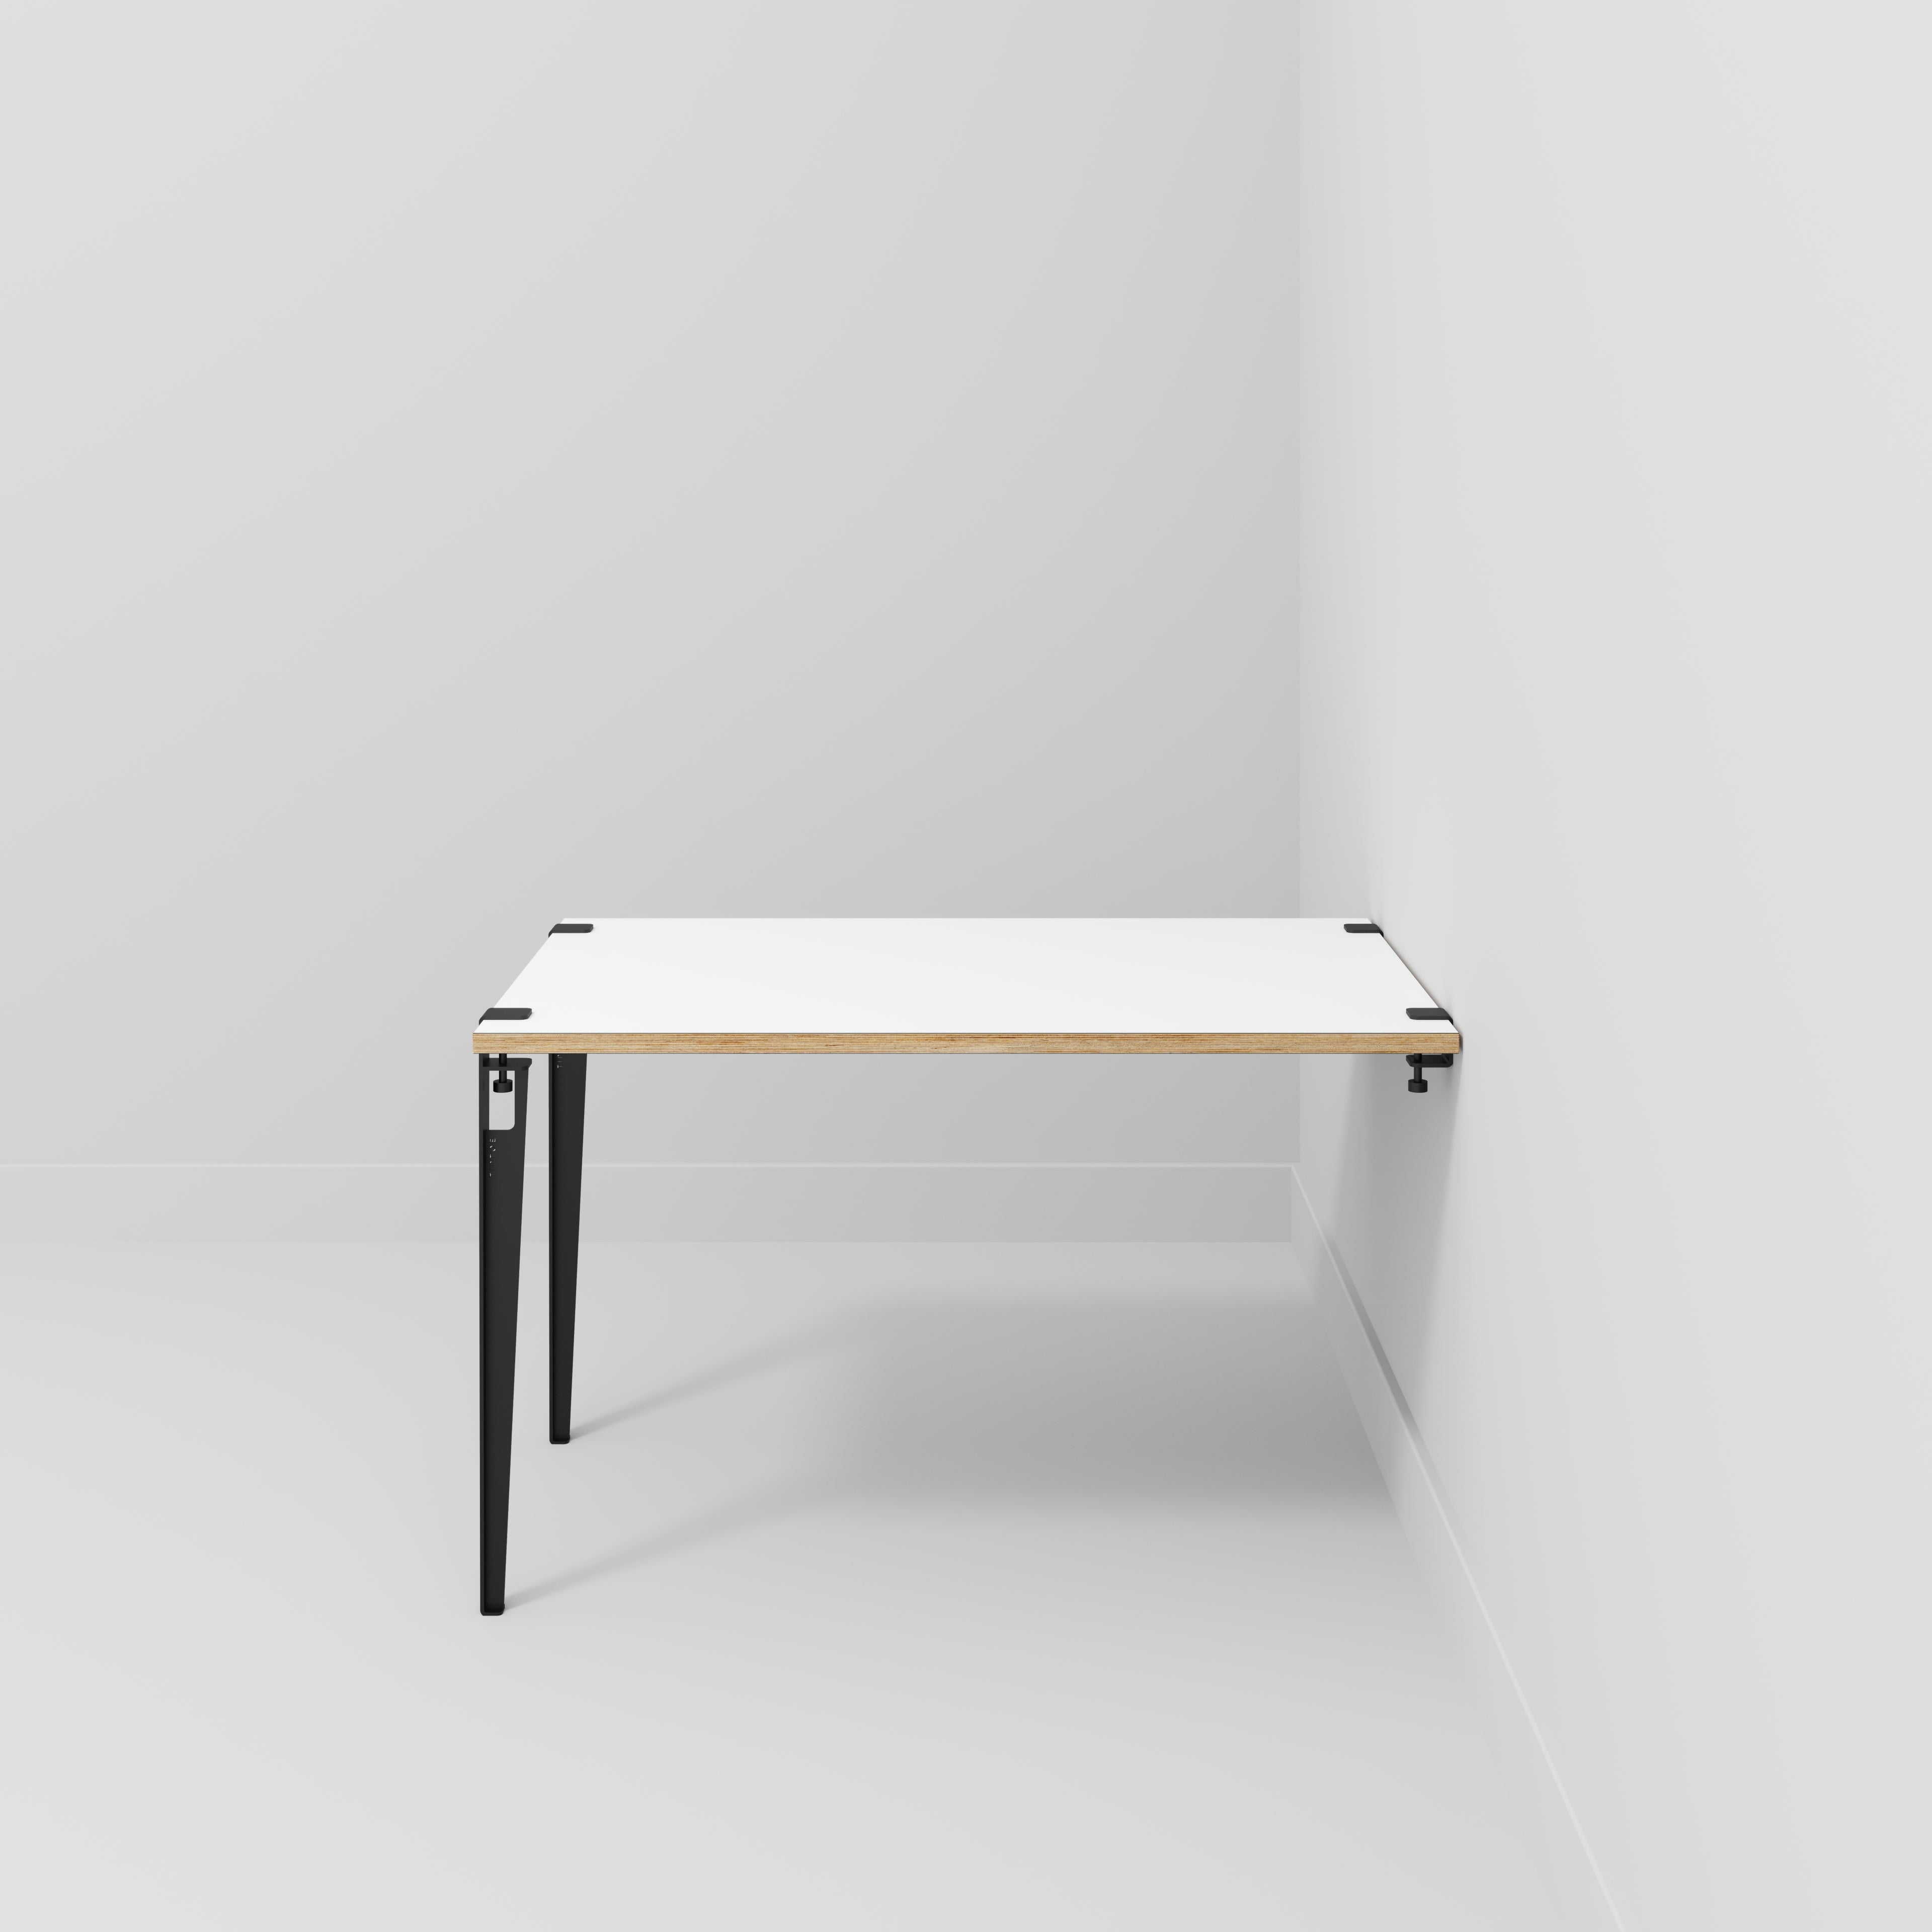 Wall Table with Black Tiptoe Legs and Brackets - Formica White - 1200(w) x 800(d) x 750(h)